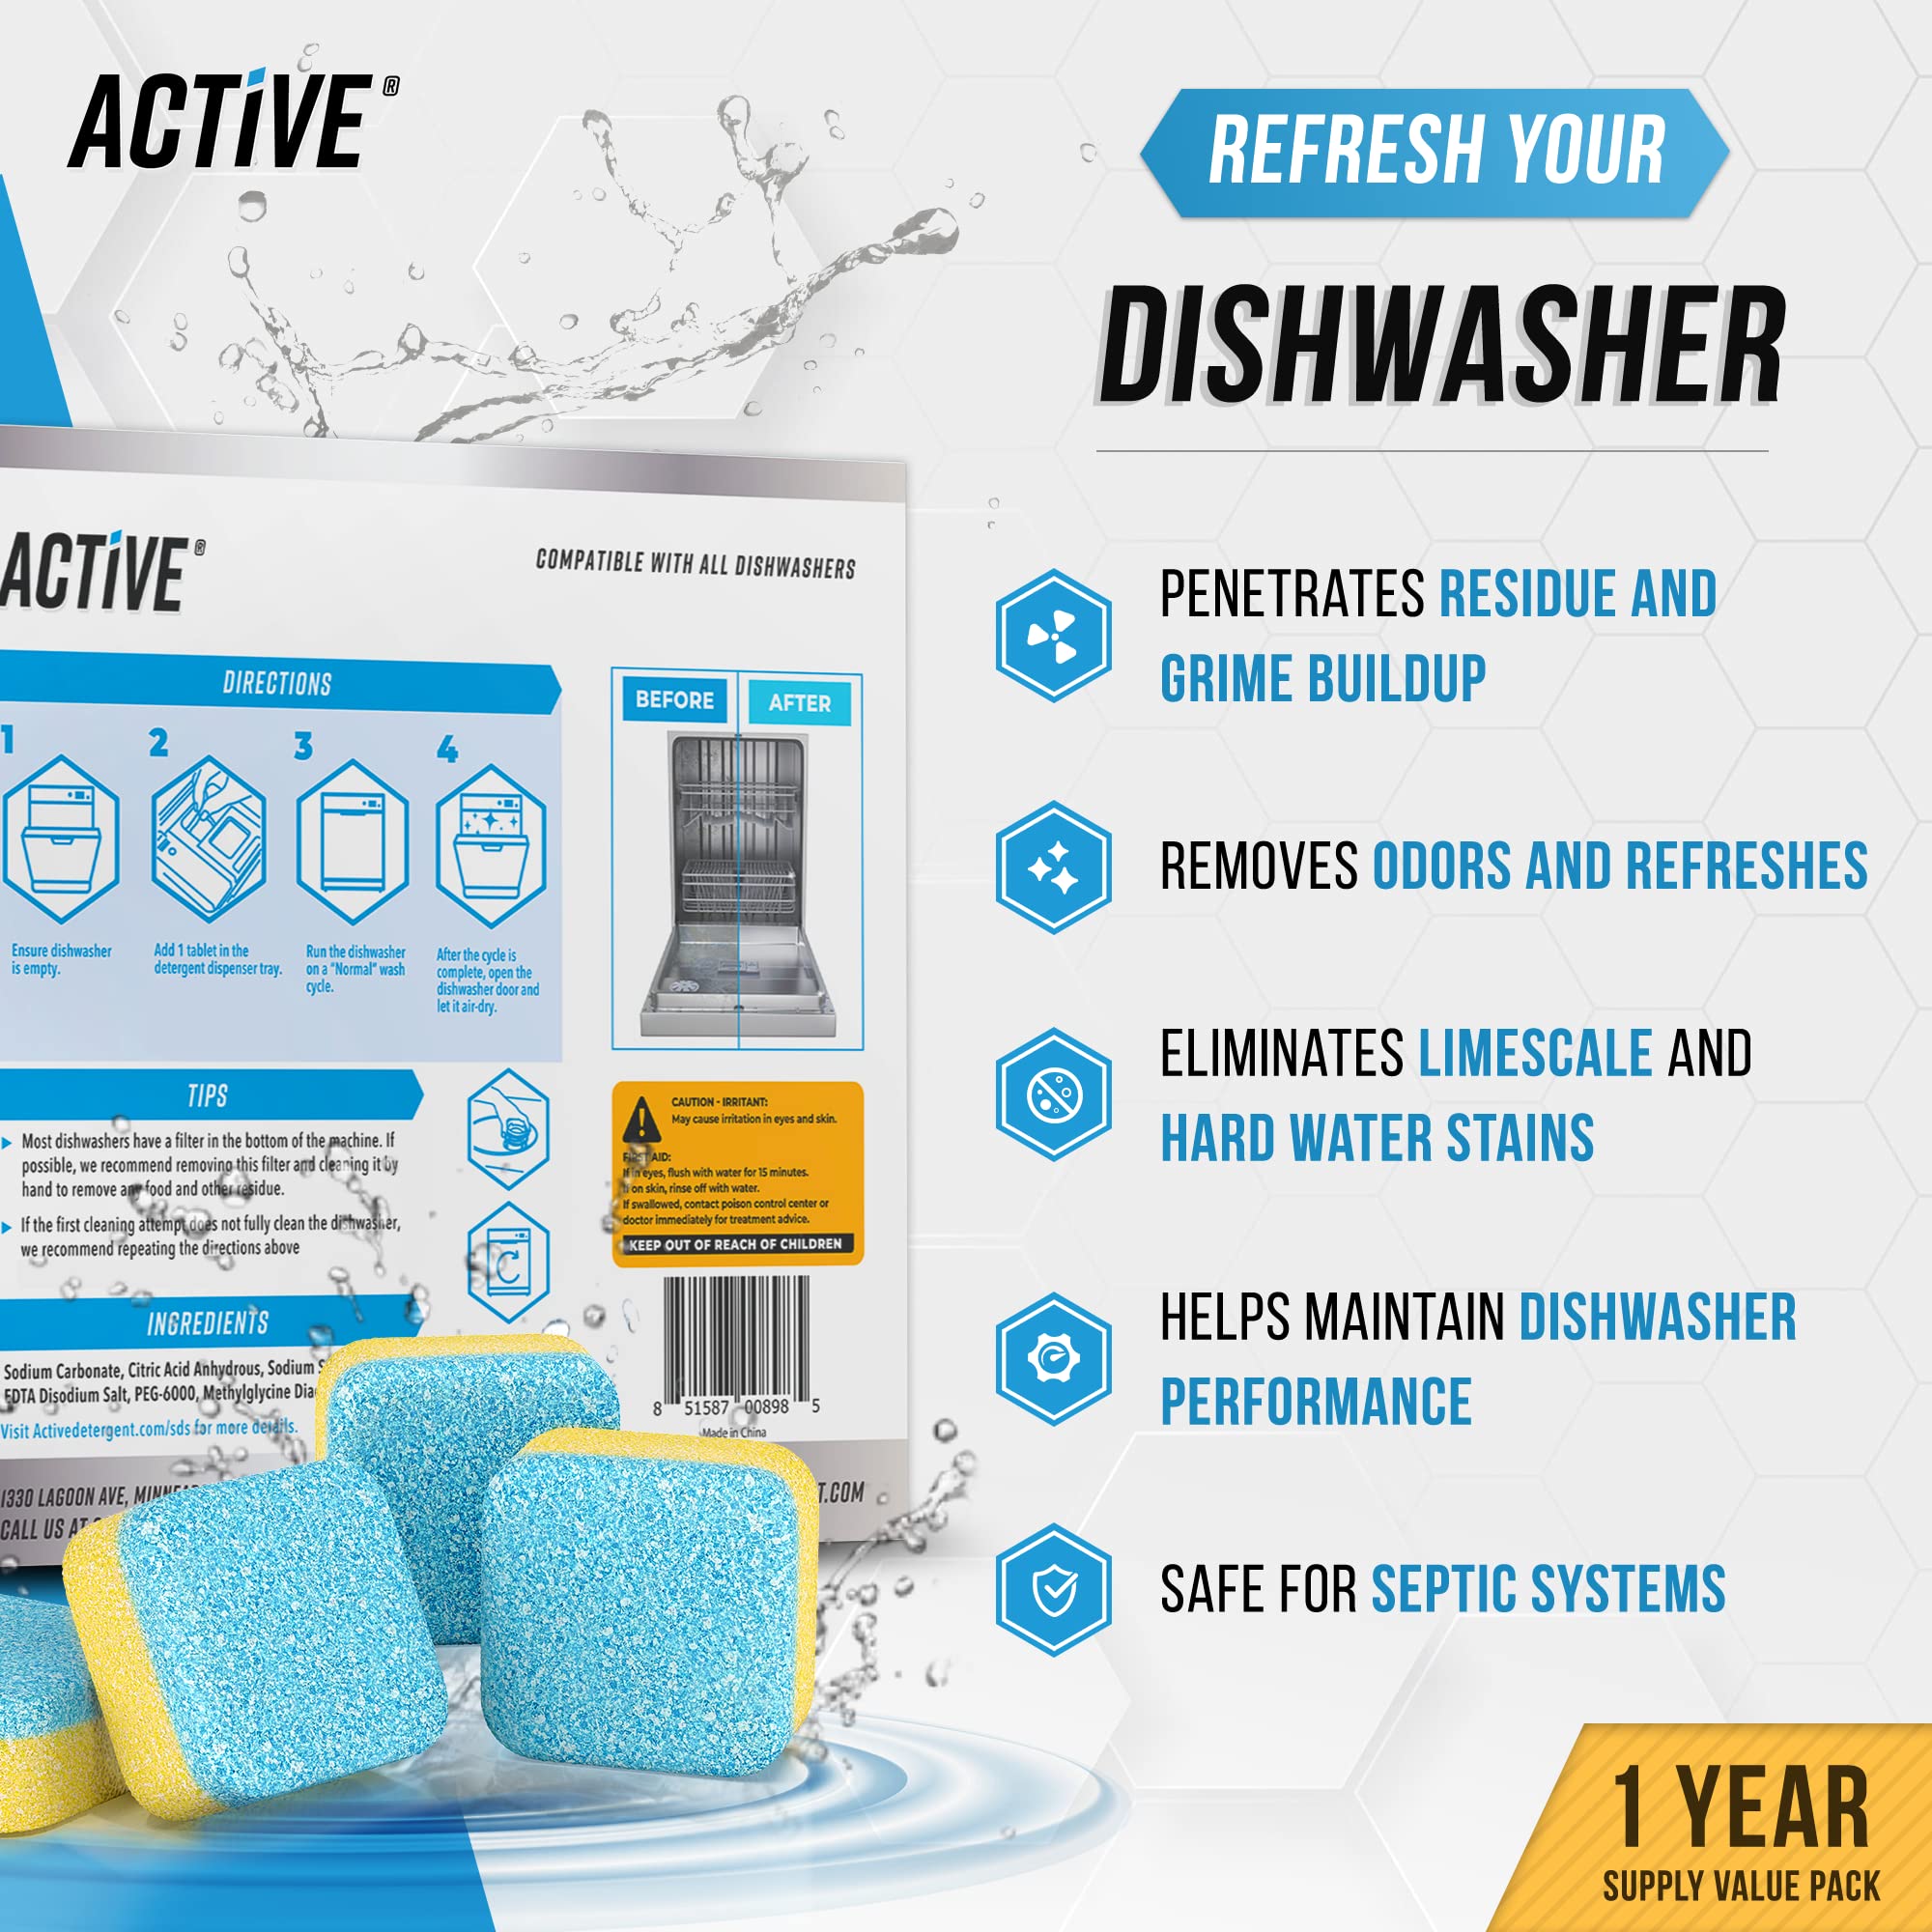 ACTIVE Dishwasher Cleaner and Coffee Machine Descaler - Includes 24ct Dishwasher Cleaning Tablets and 32oz Coffee Machine Cleaner